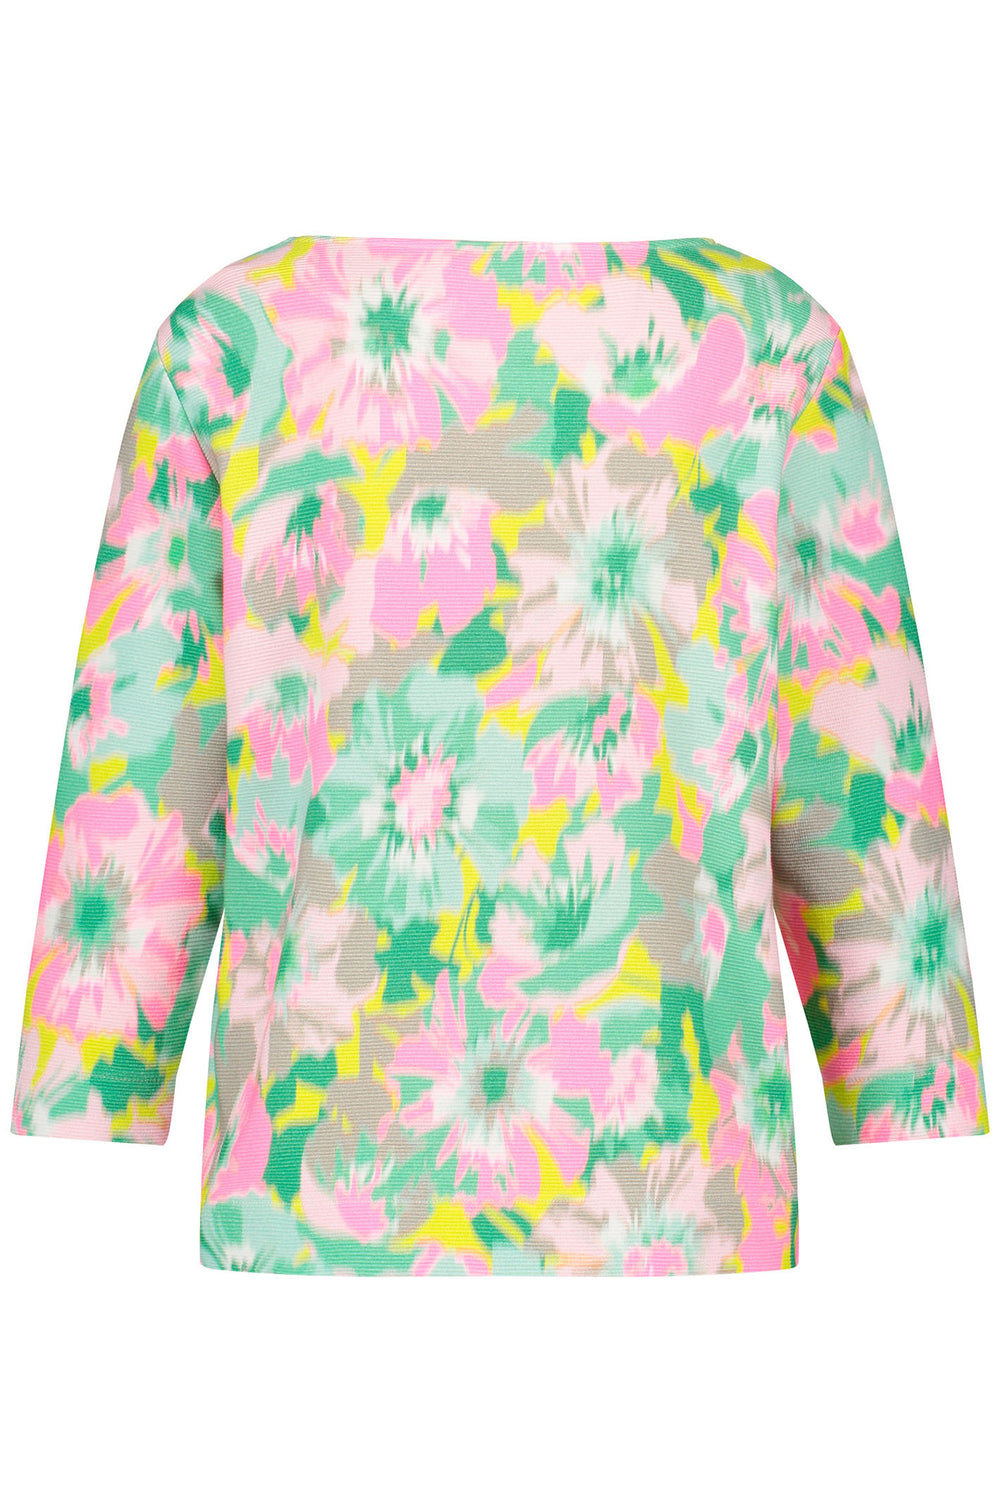 Gerry Weber 270058 Mint Green Floral Print Top - Experience Boutique